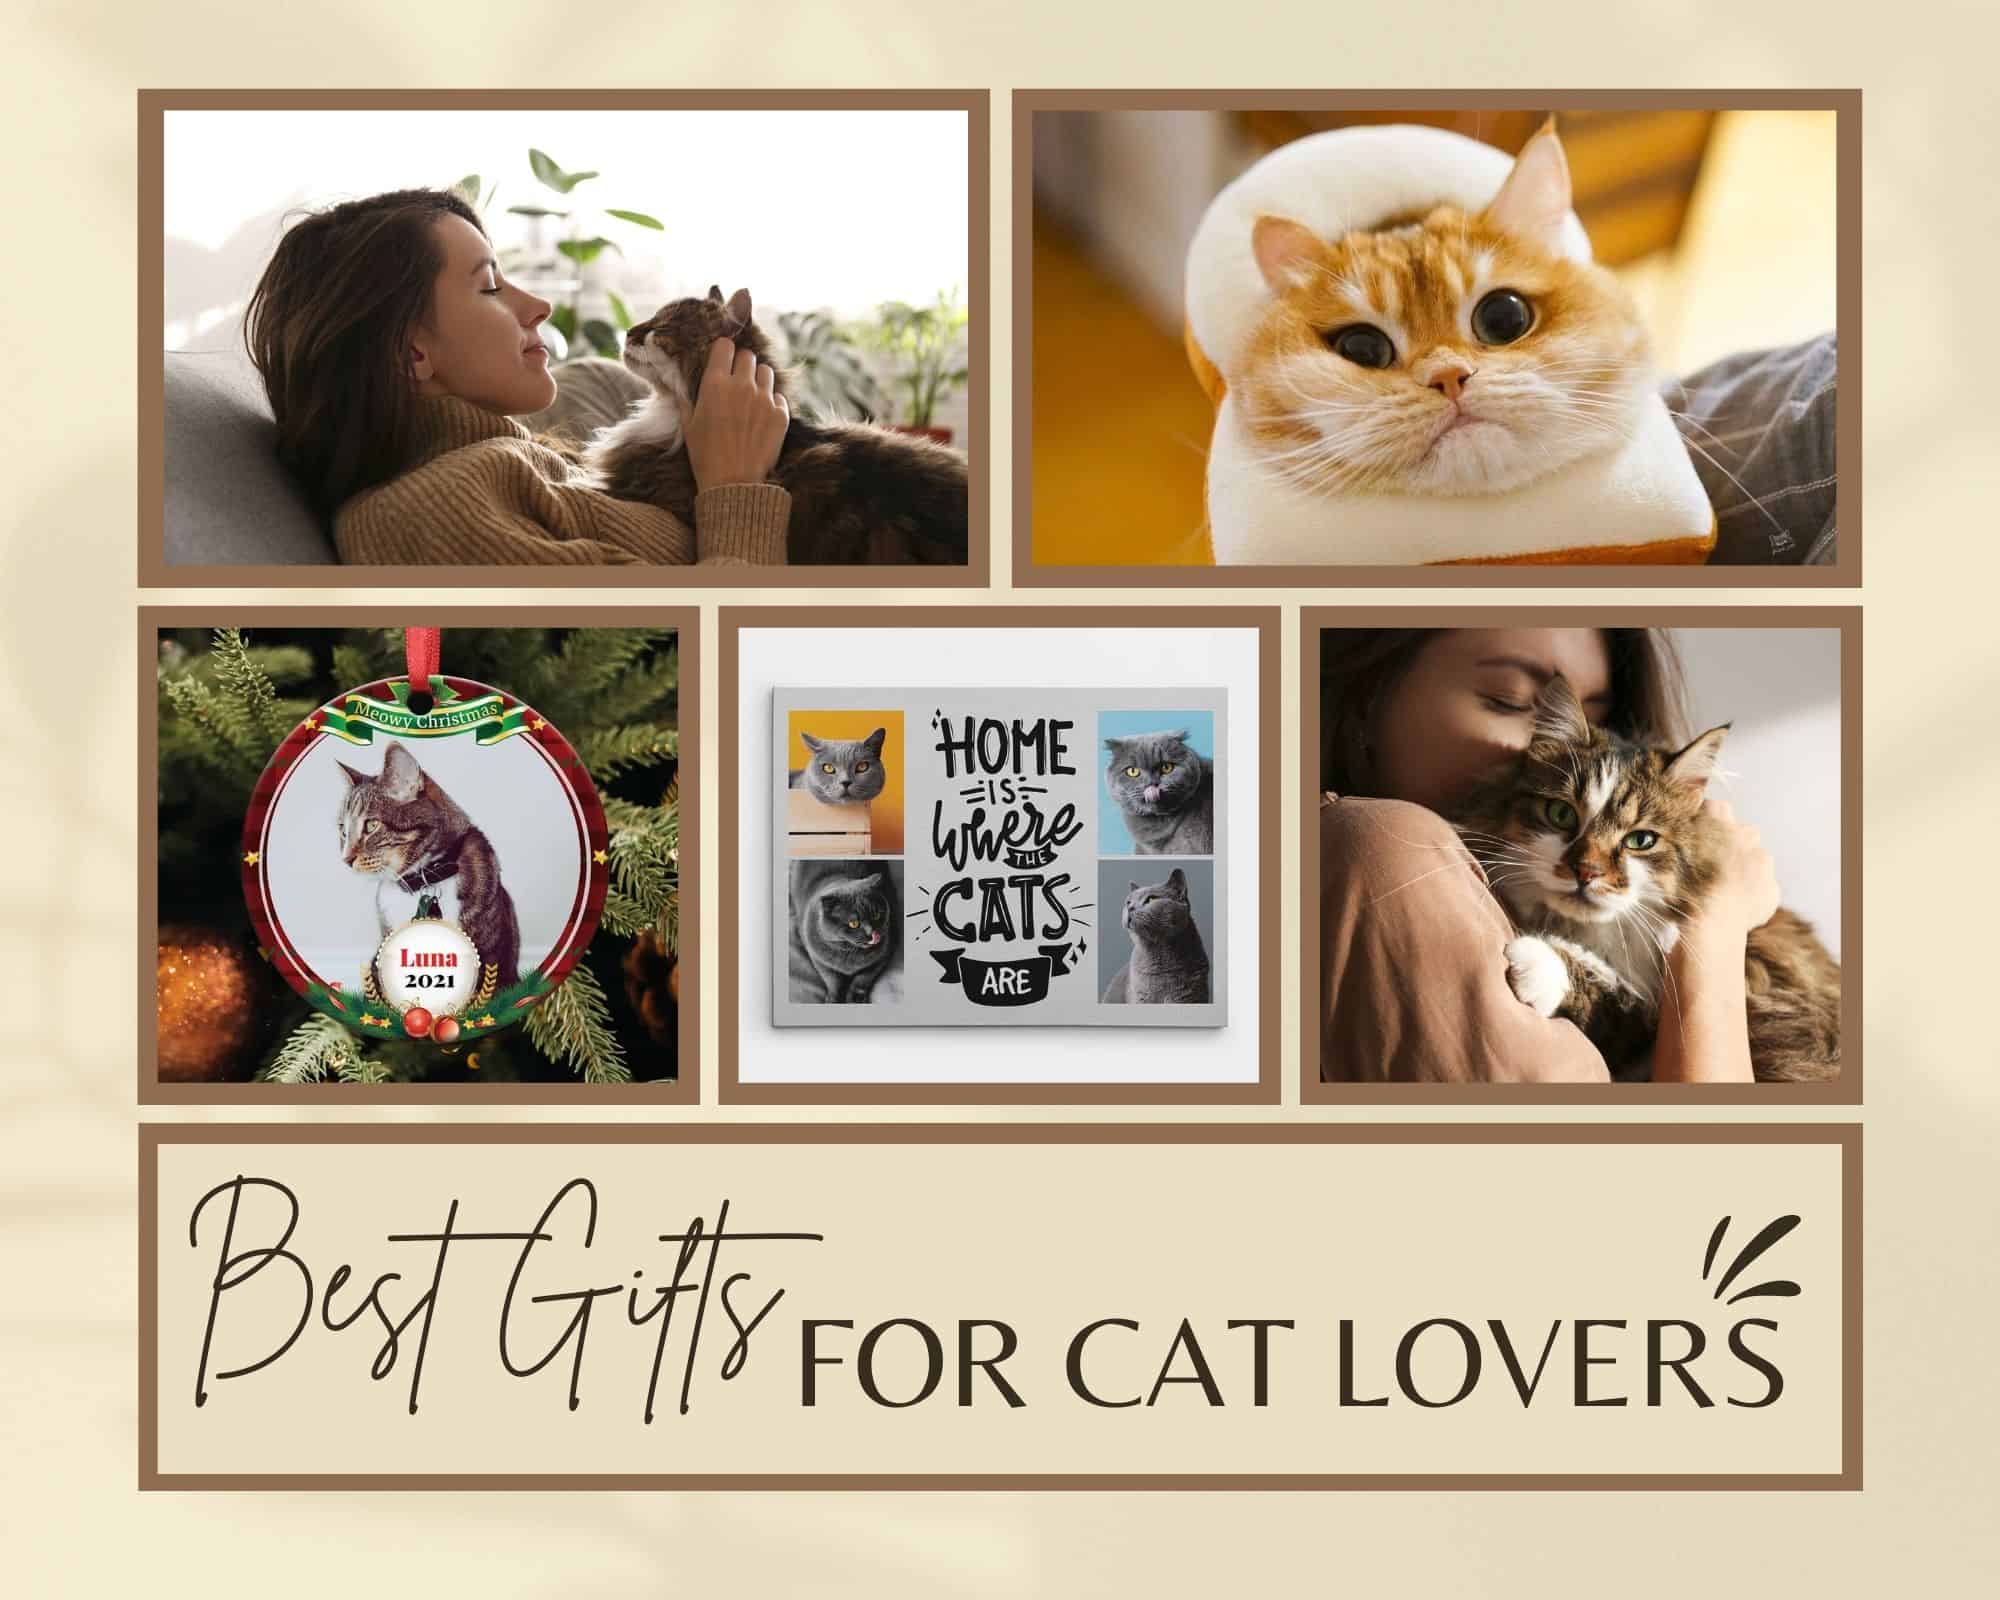 48 Best Gifts for Cat Lovers: Cat-Themed Gifts for Cat Owners